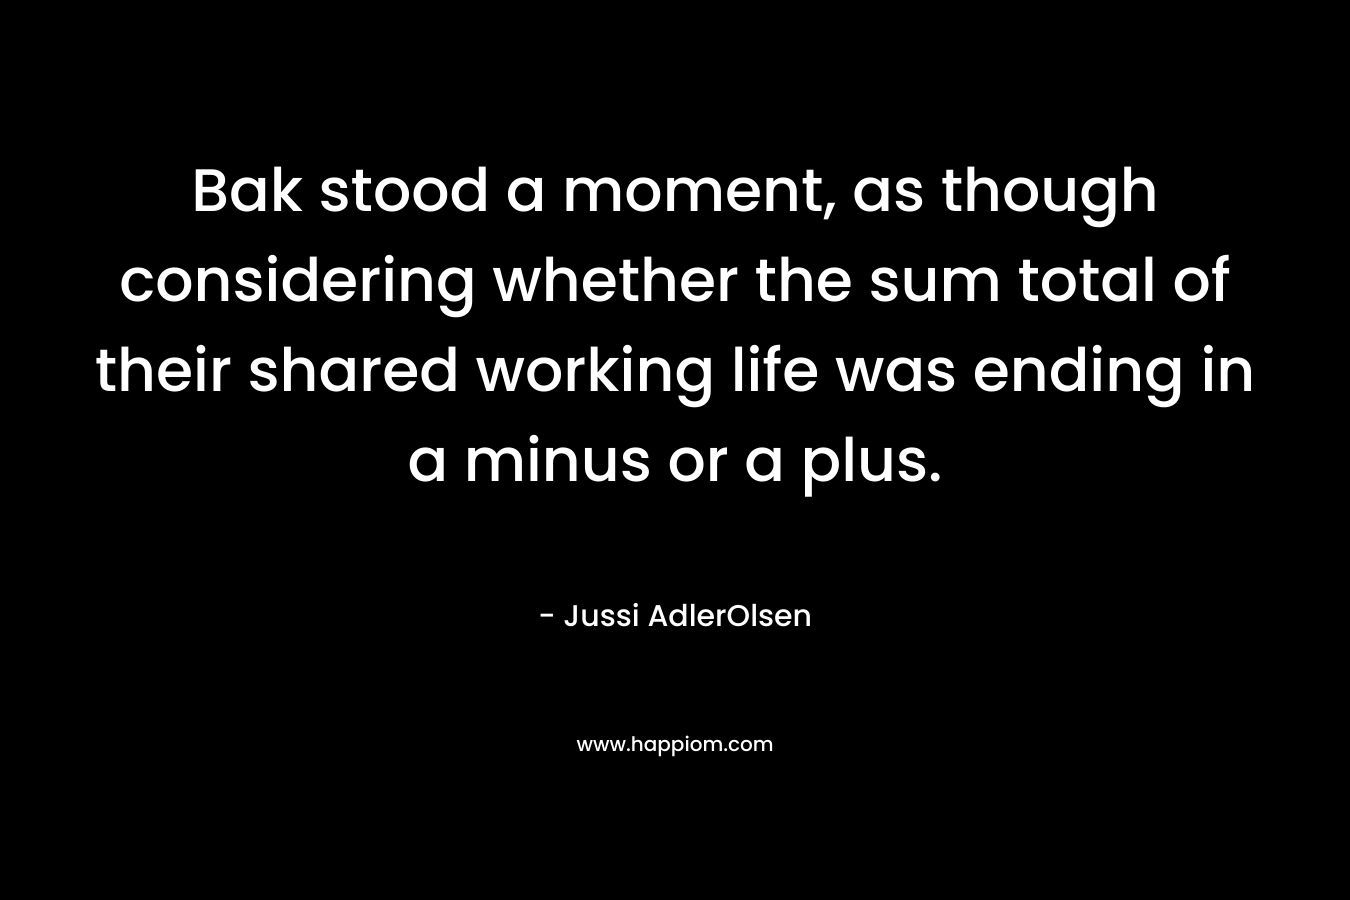 Bak stood a moment, as though considering whether the sum total of their shared working life was ending in a minus or a plus. – Jussi AdlerOlsen